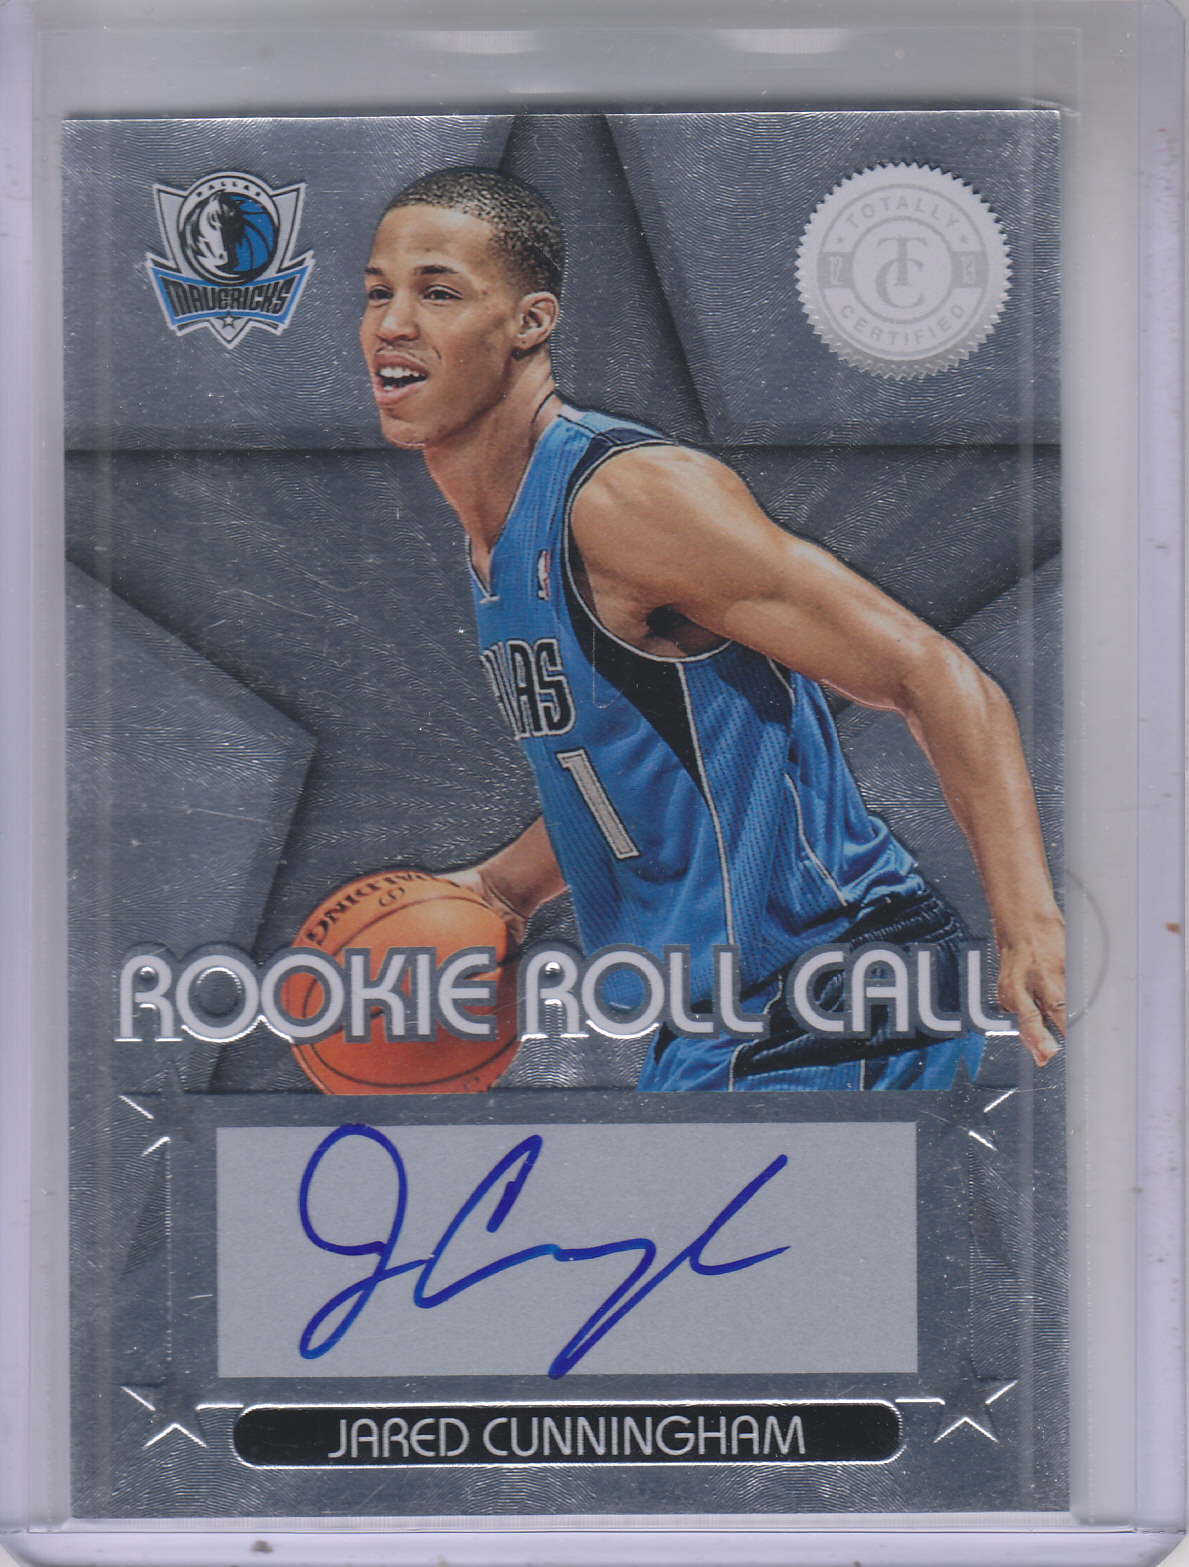 2012-13 Totally Certified Rookie Roll Call Autographs #55 Jared Cunningham